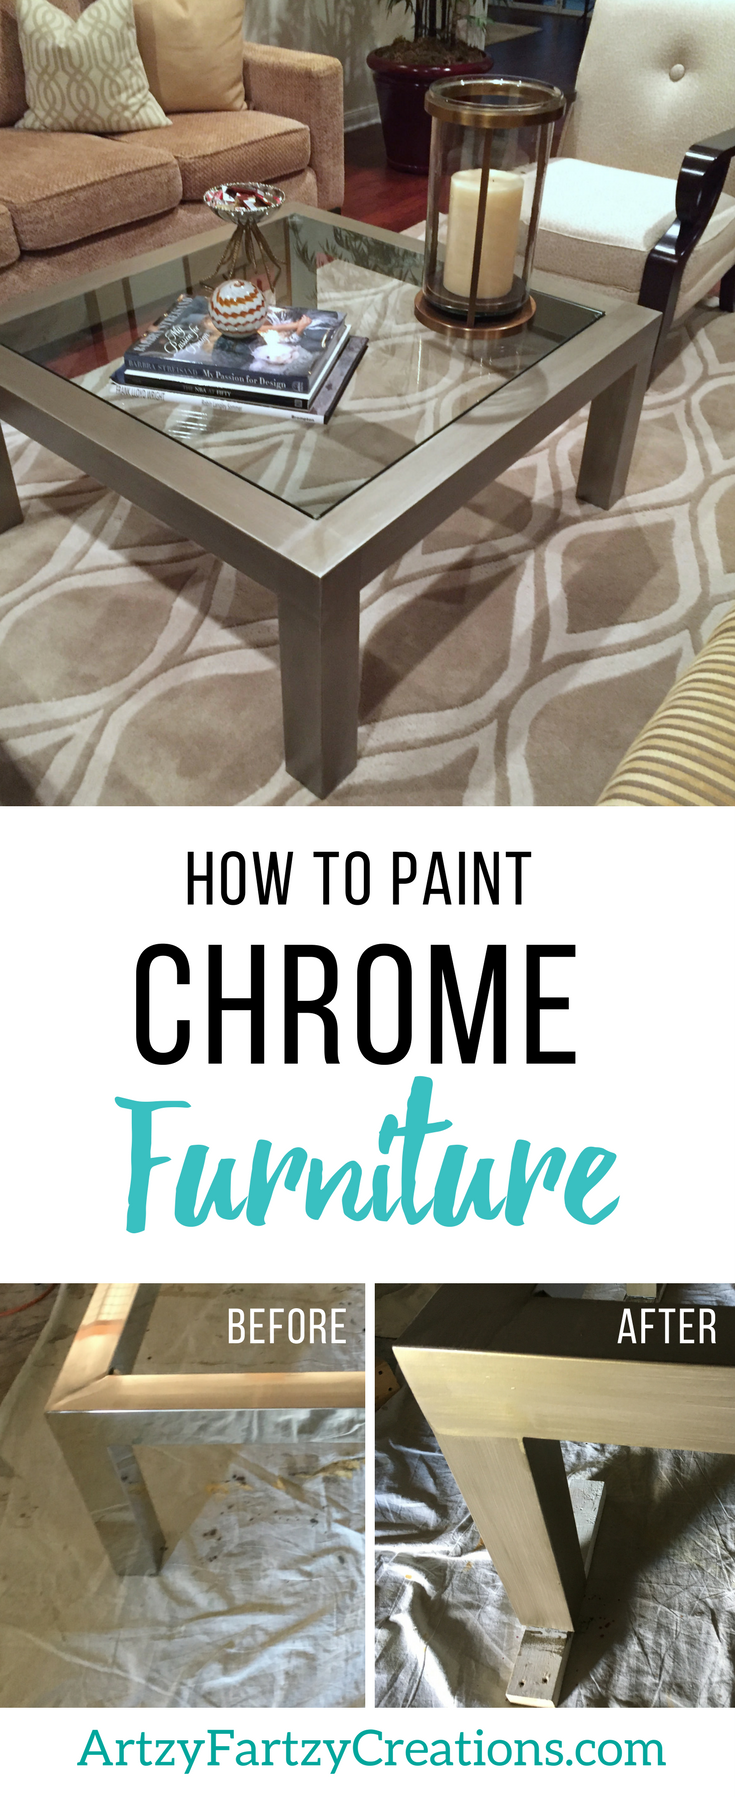 How to Paint Chrome Furniture by Cheryl Phan | Furniture Painting Ideas | Metallic Furniture Finish